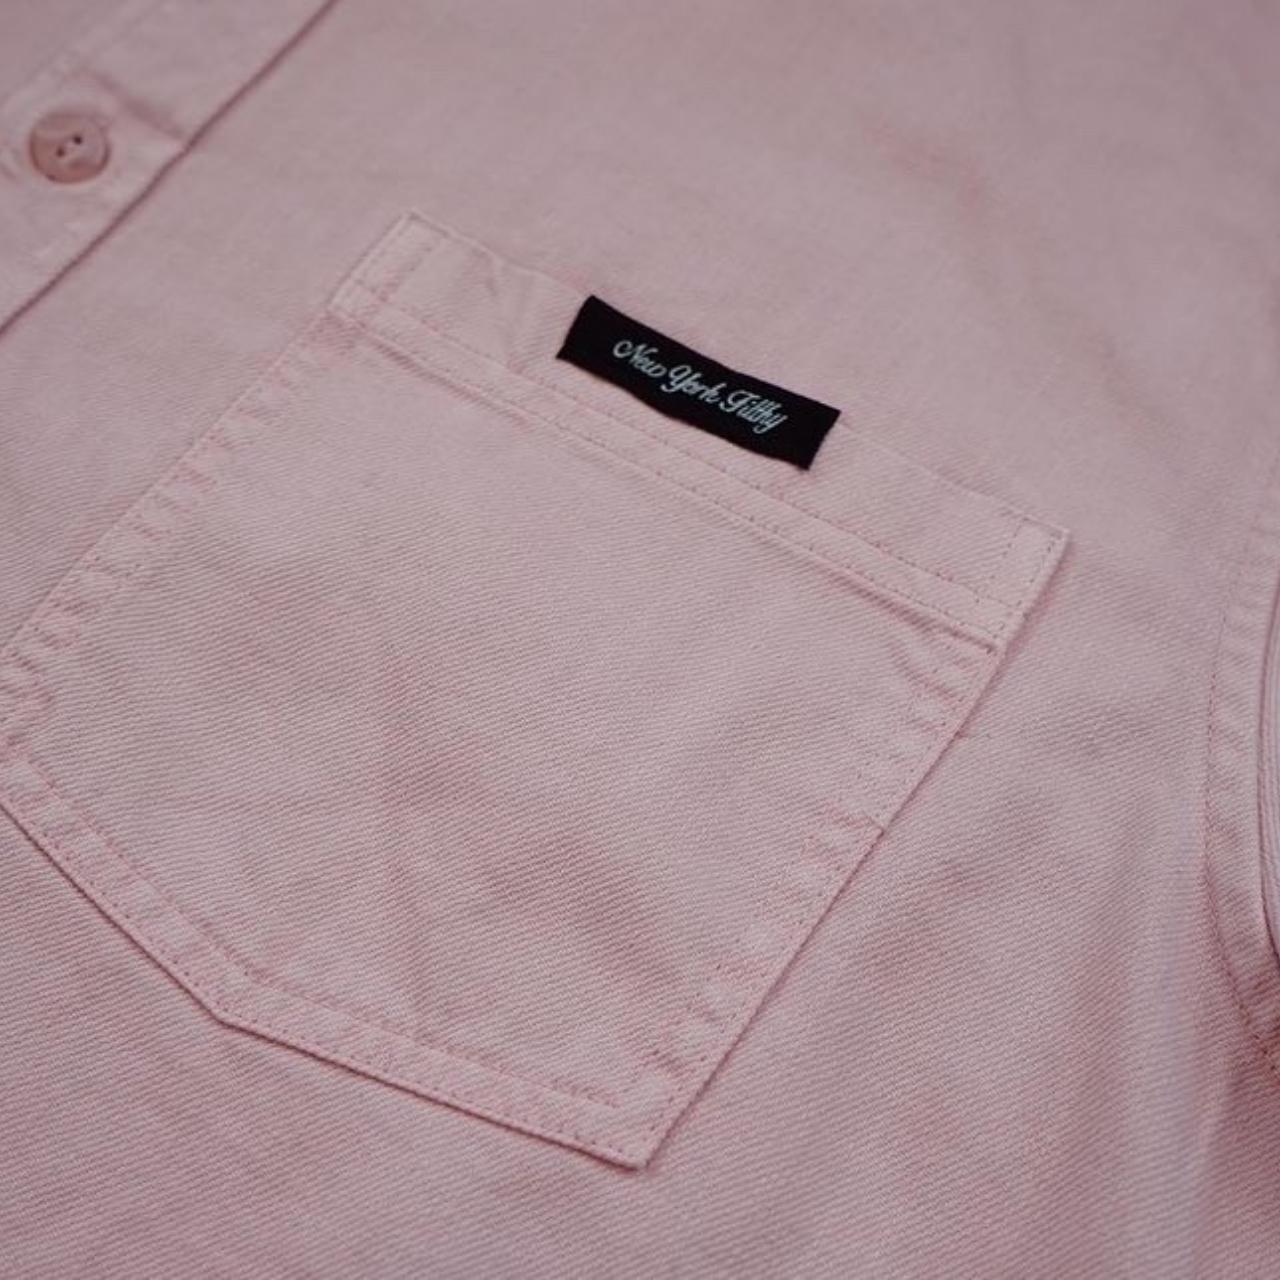 New York Filthy Men's Cream and Pink Shirt (4)